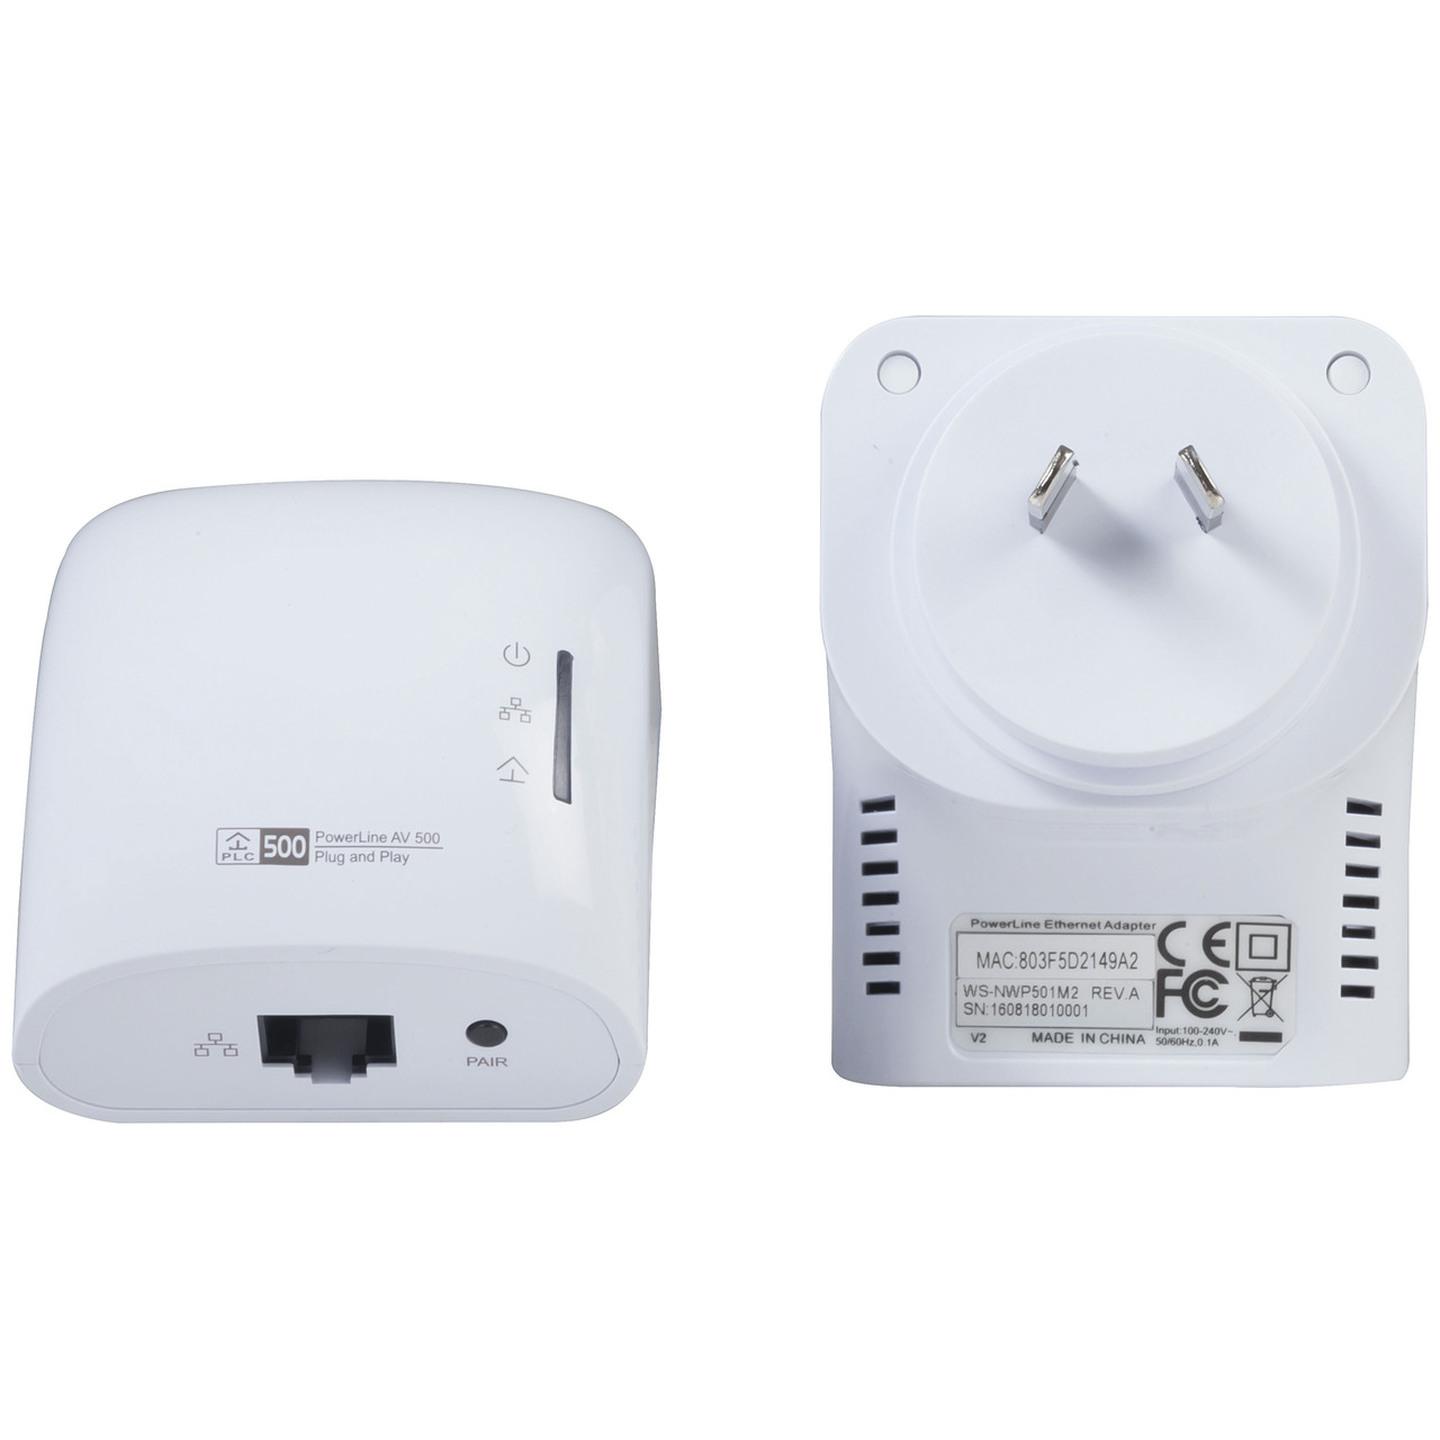 Ethernet Over Power N300 Wi-Fi Access Point